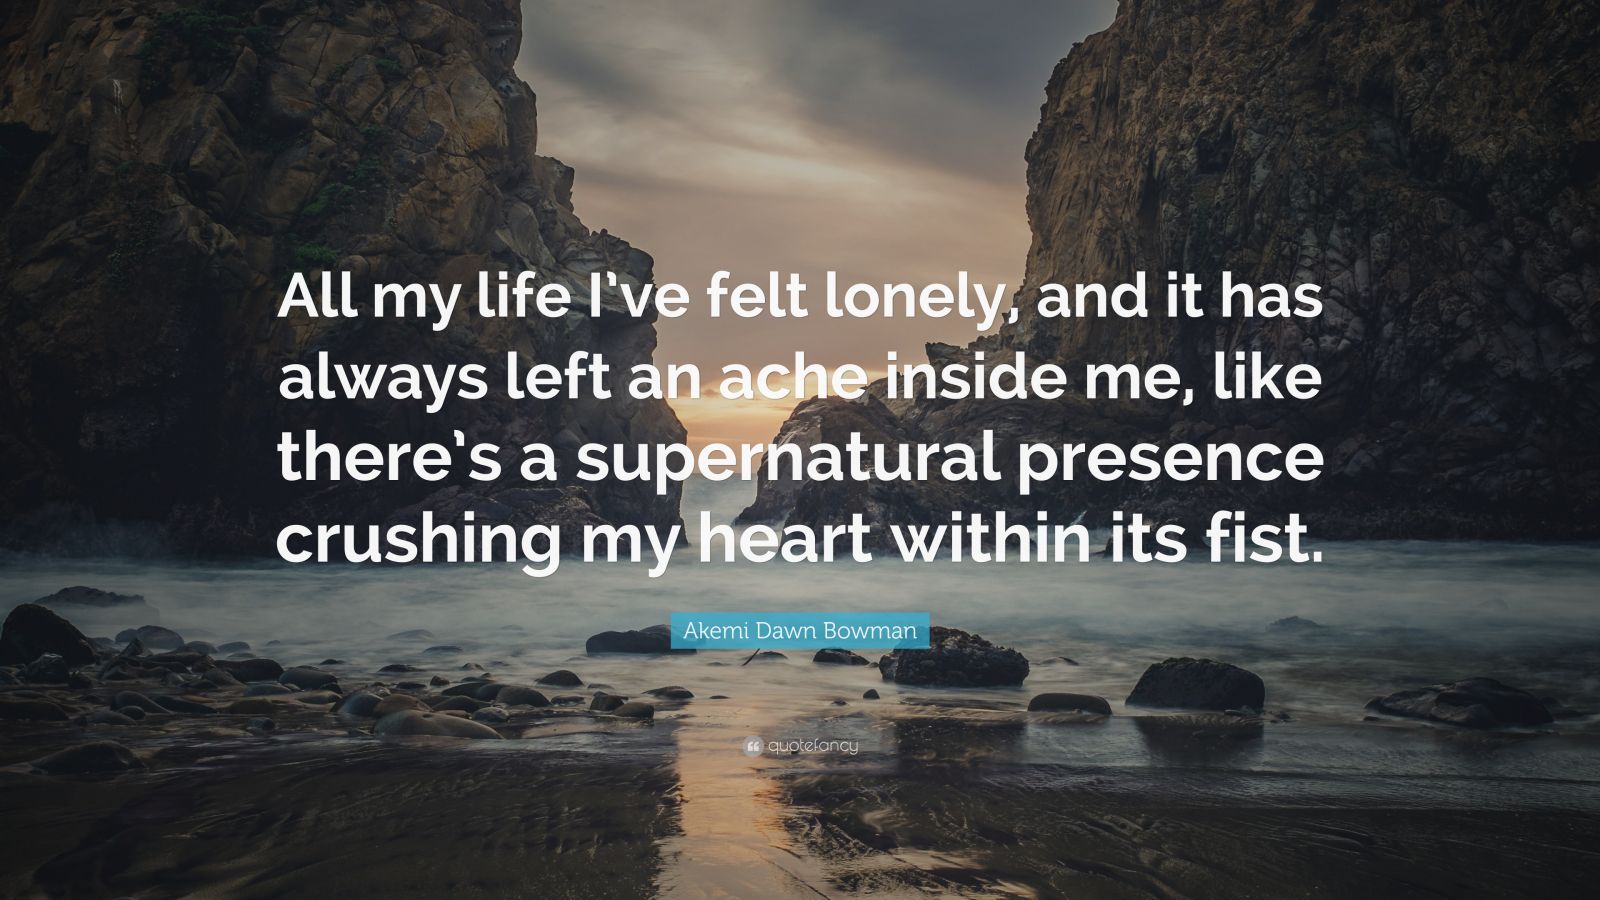 Feeling Alone: 13 Ways to Stop Feeling So Lonely and Isolated ⋆ LonerWolf